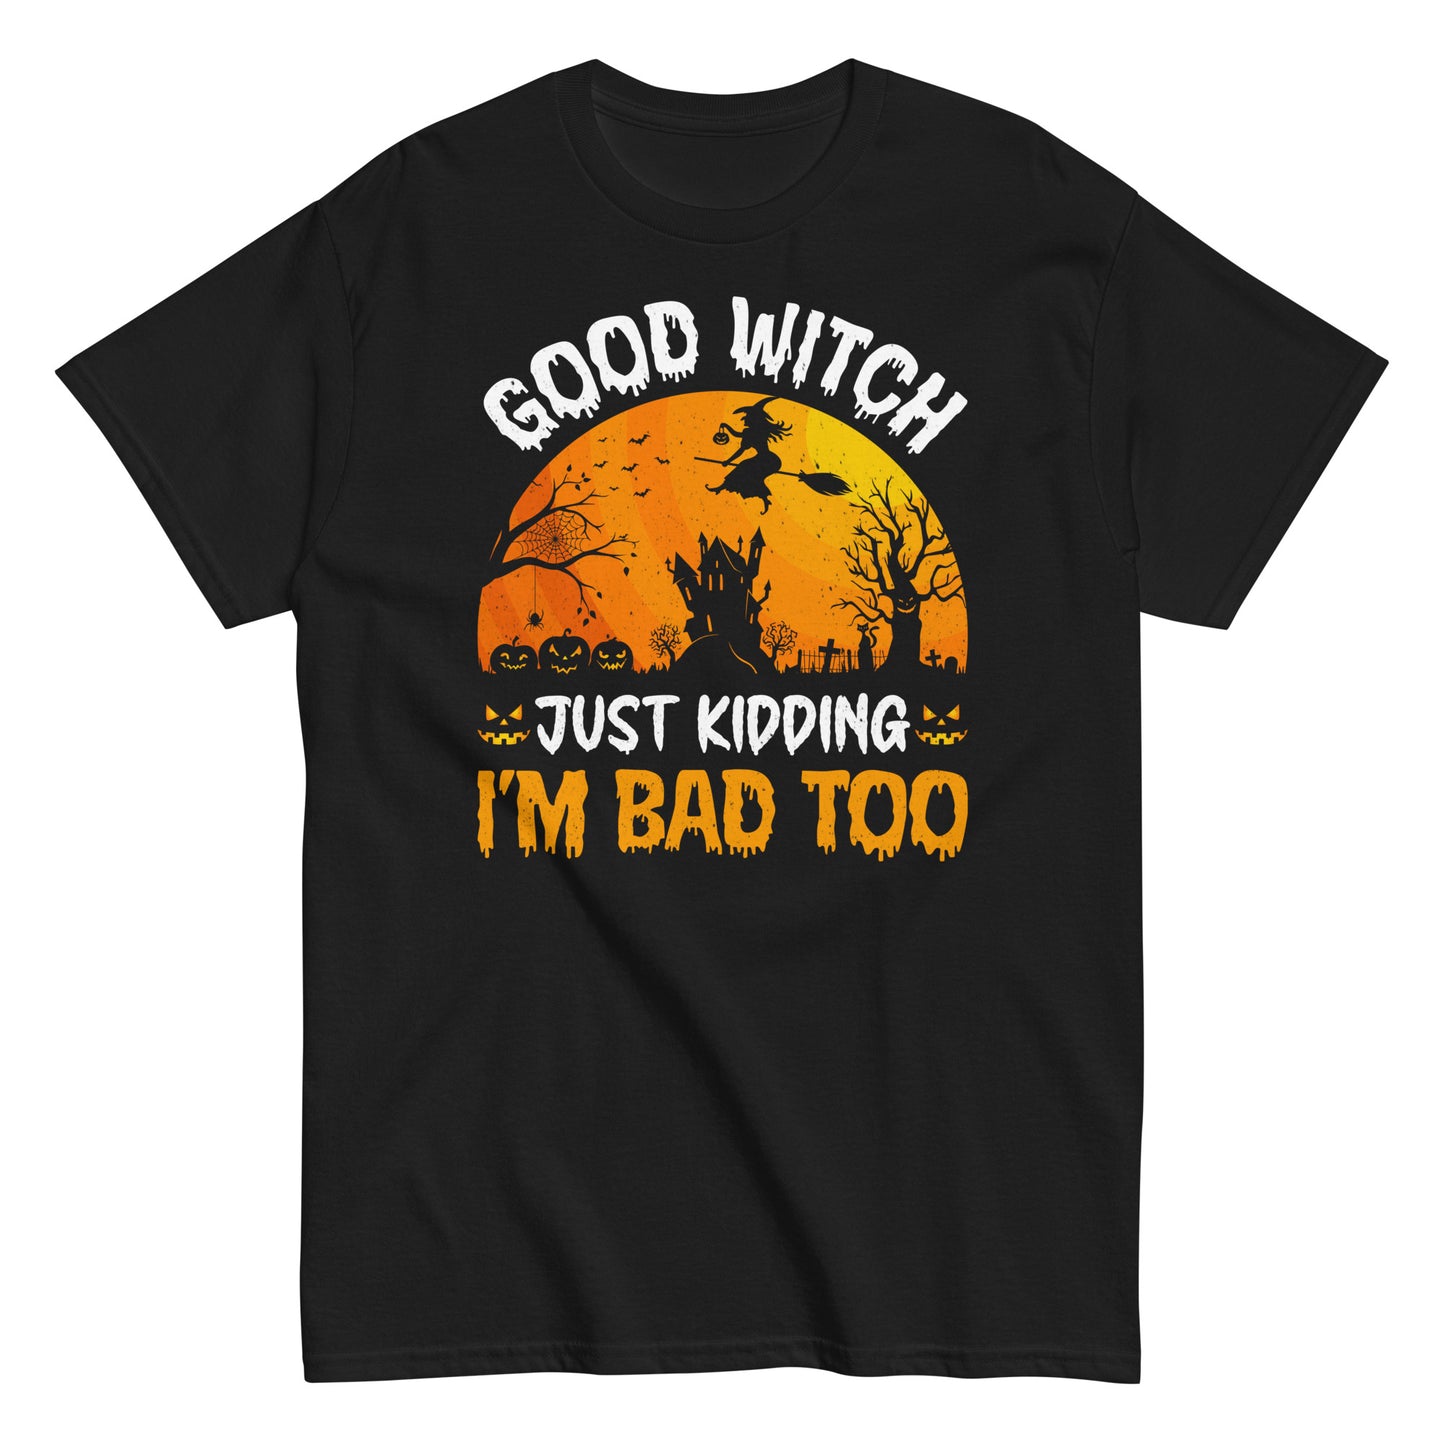 Good Witch, Just Kidding I'm Bad Too, Wickedly Good & Bad: Halloween Tee